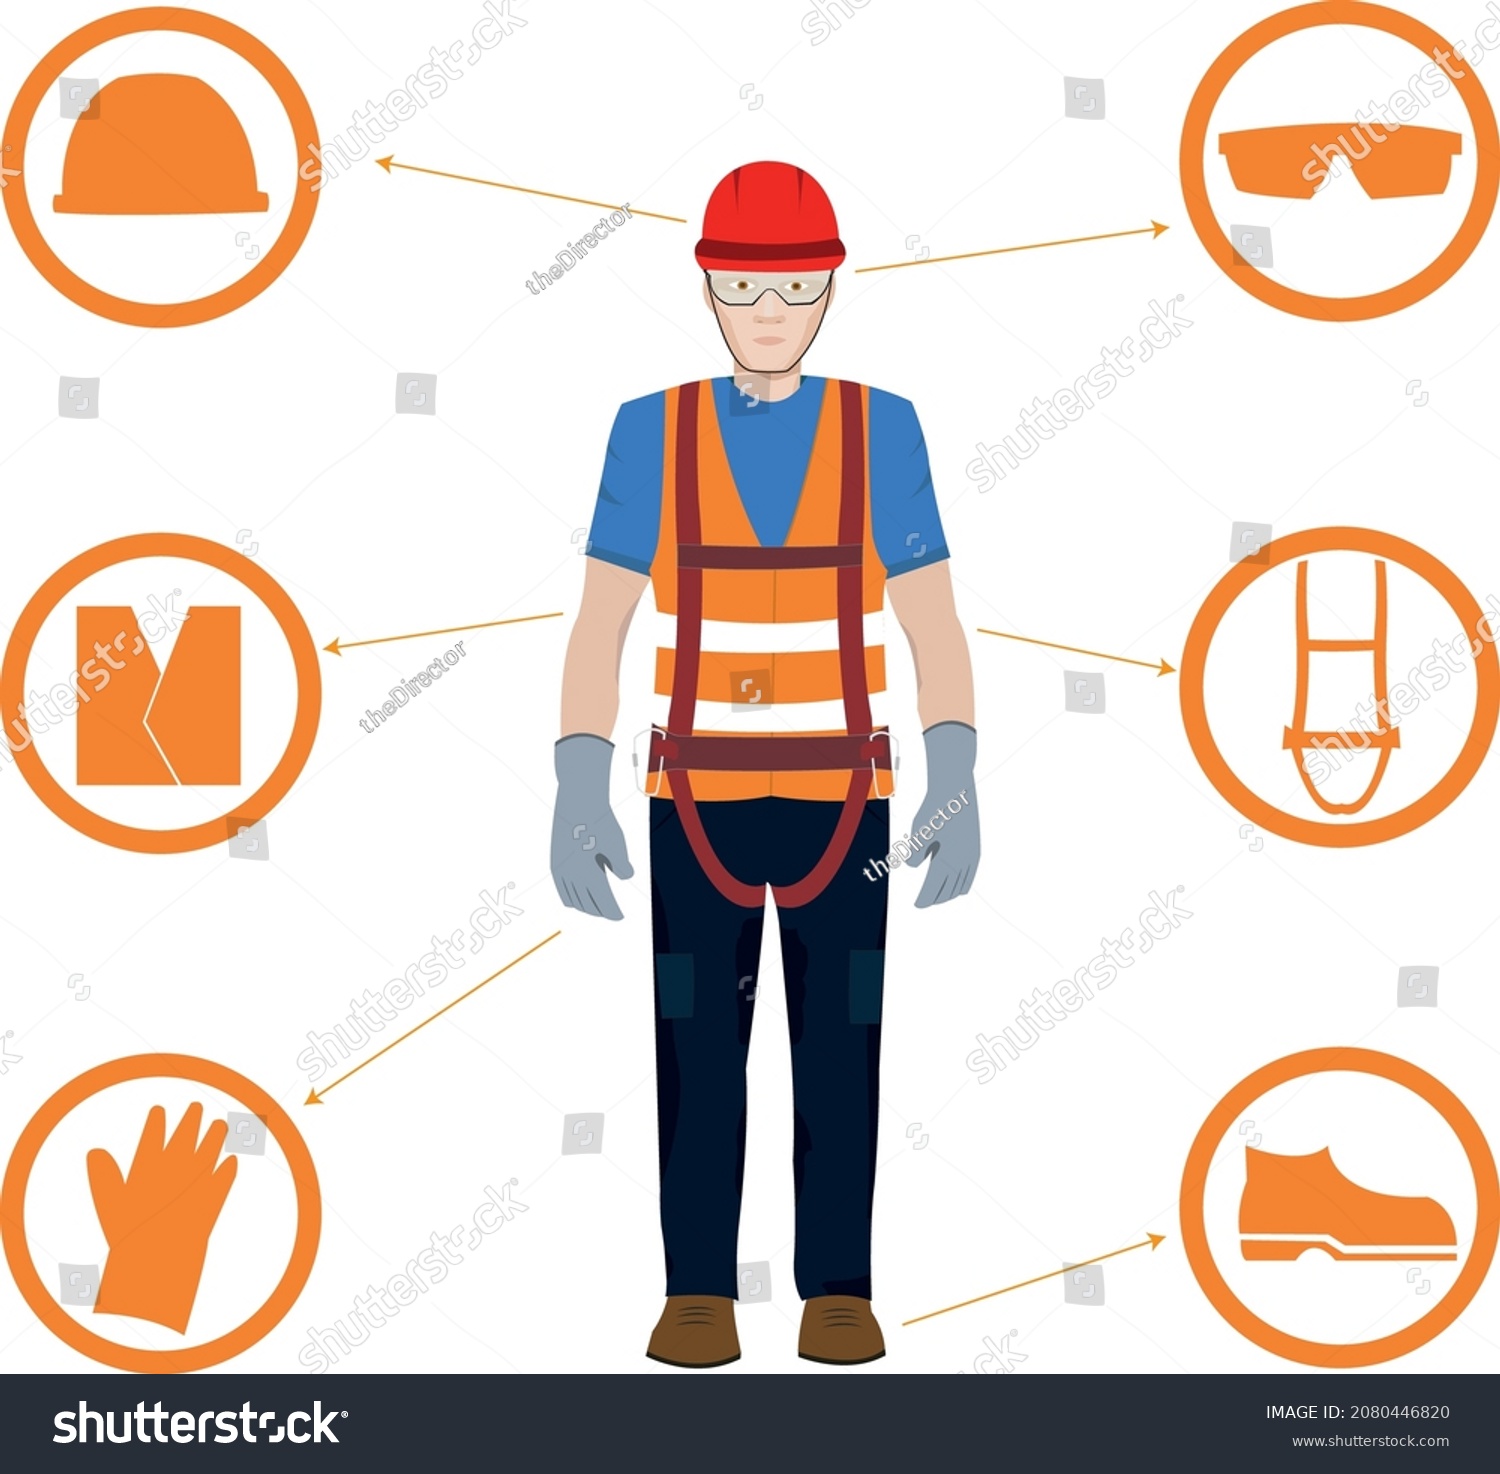 Worker Personal Protective Equipments Safety Icons Stock Vector ...